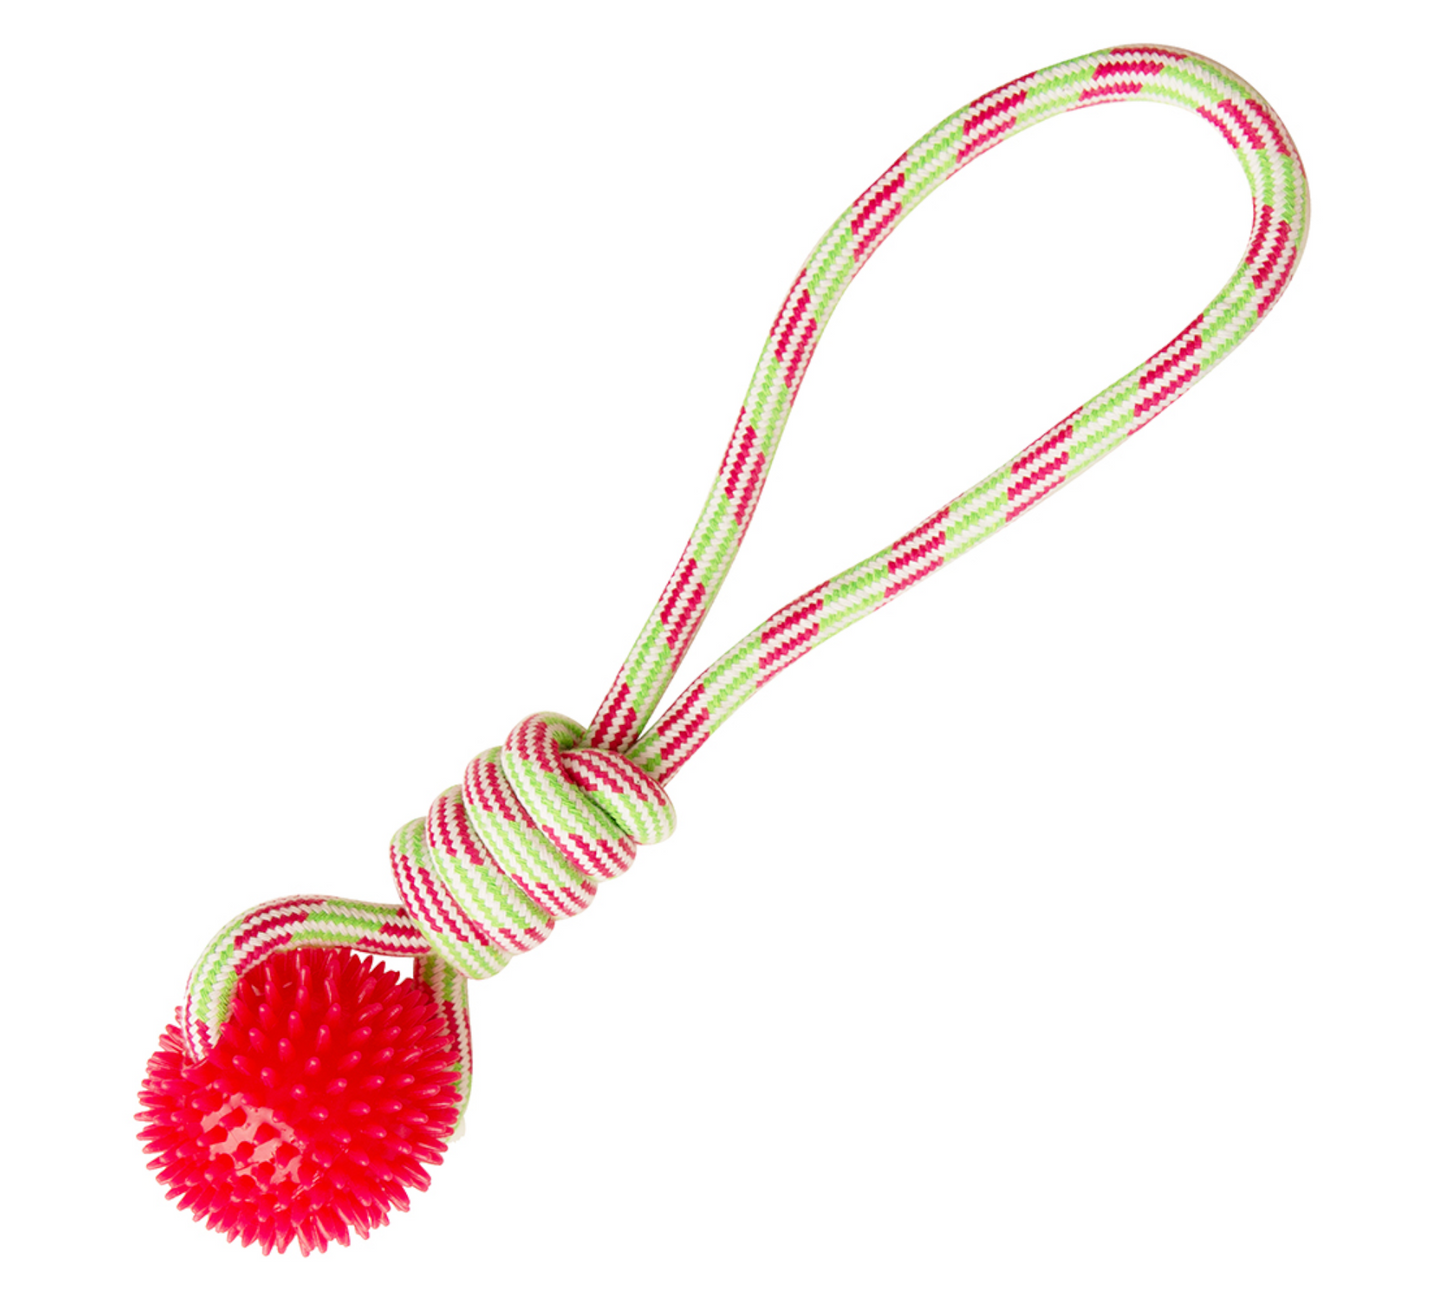 Spike-O-Mite - 16" Rope Toy, Color Varies